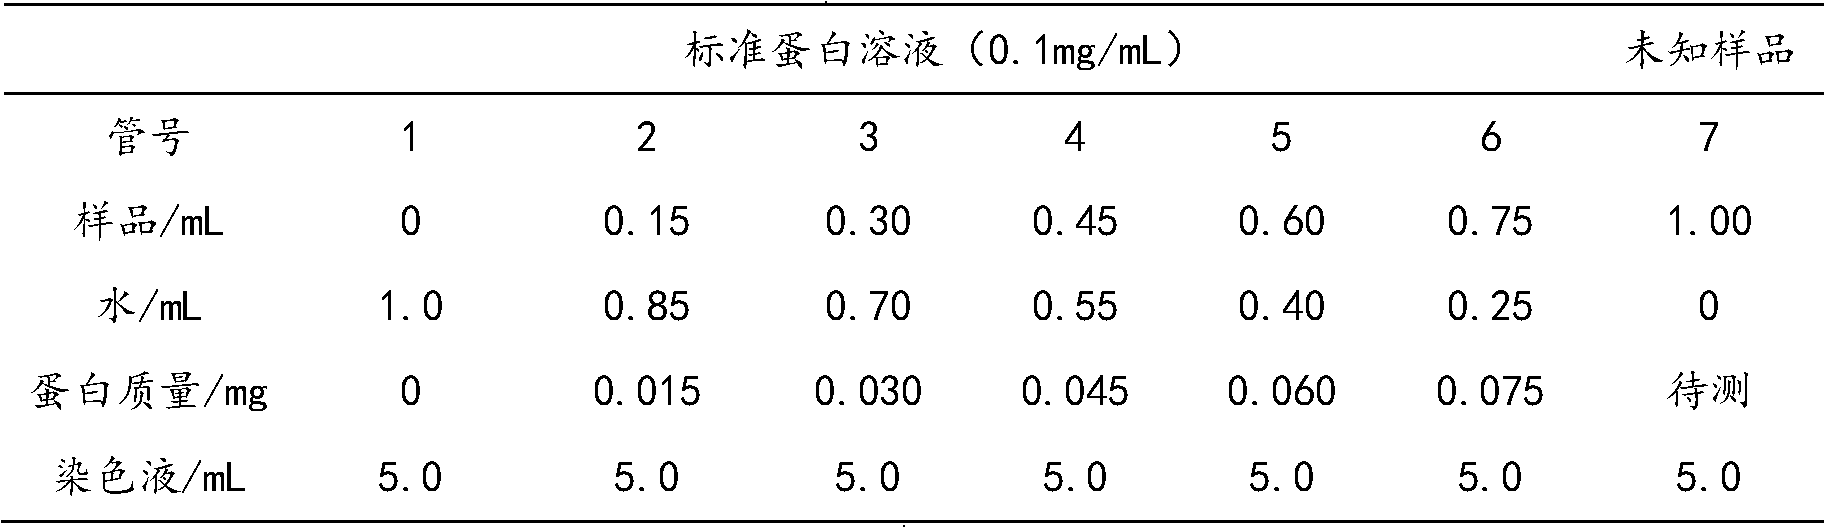 Renaturation liquid for recombining chicken alpha interferon inclusion body as well as preparation method and application thereof